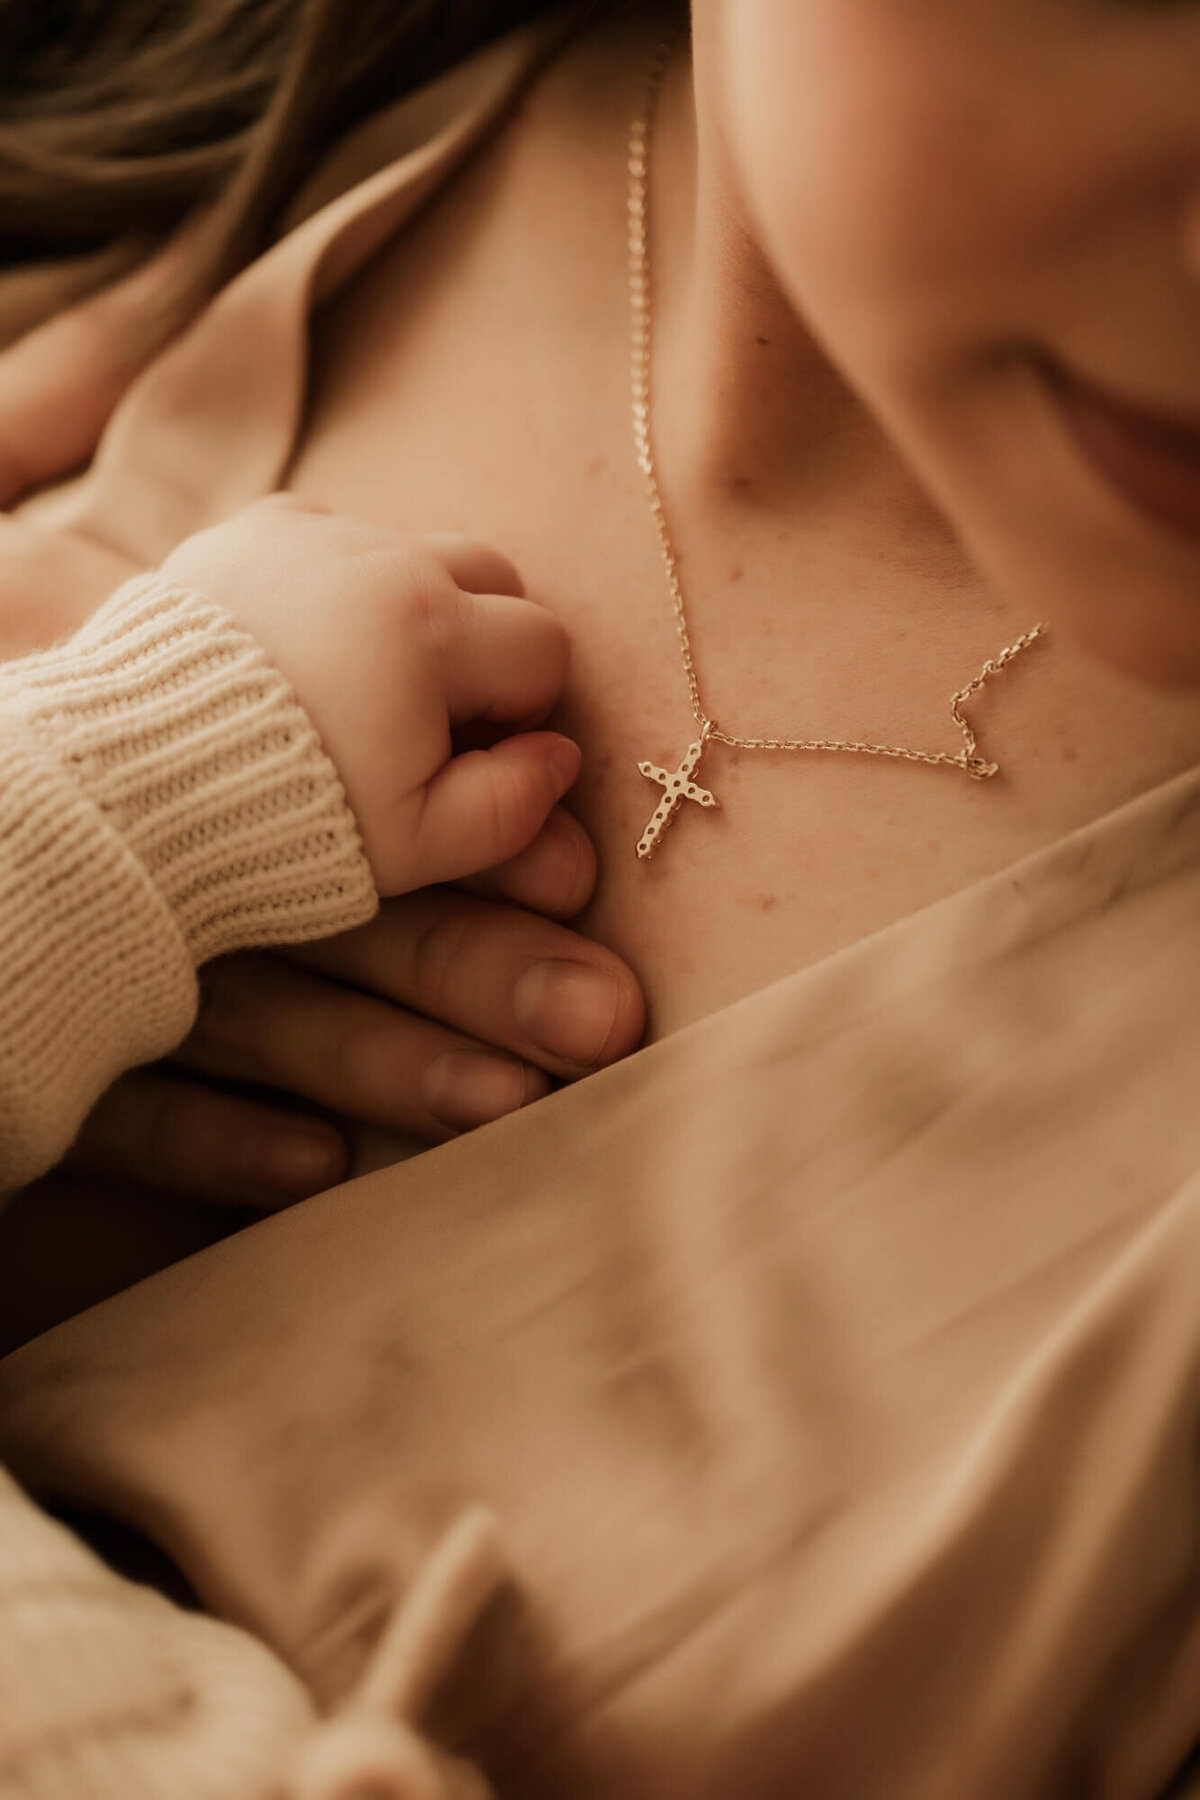 Baby girl's hand placed on her mothers next to the mother's cross necklace.